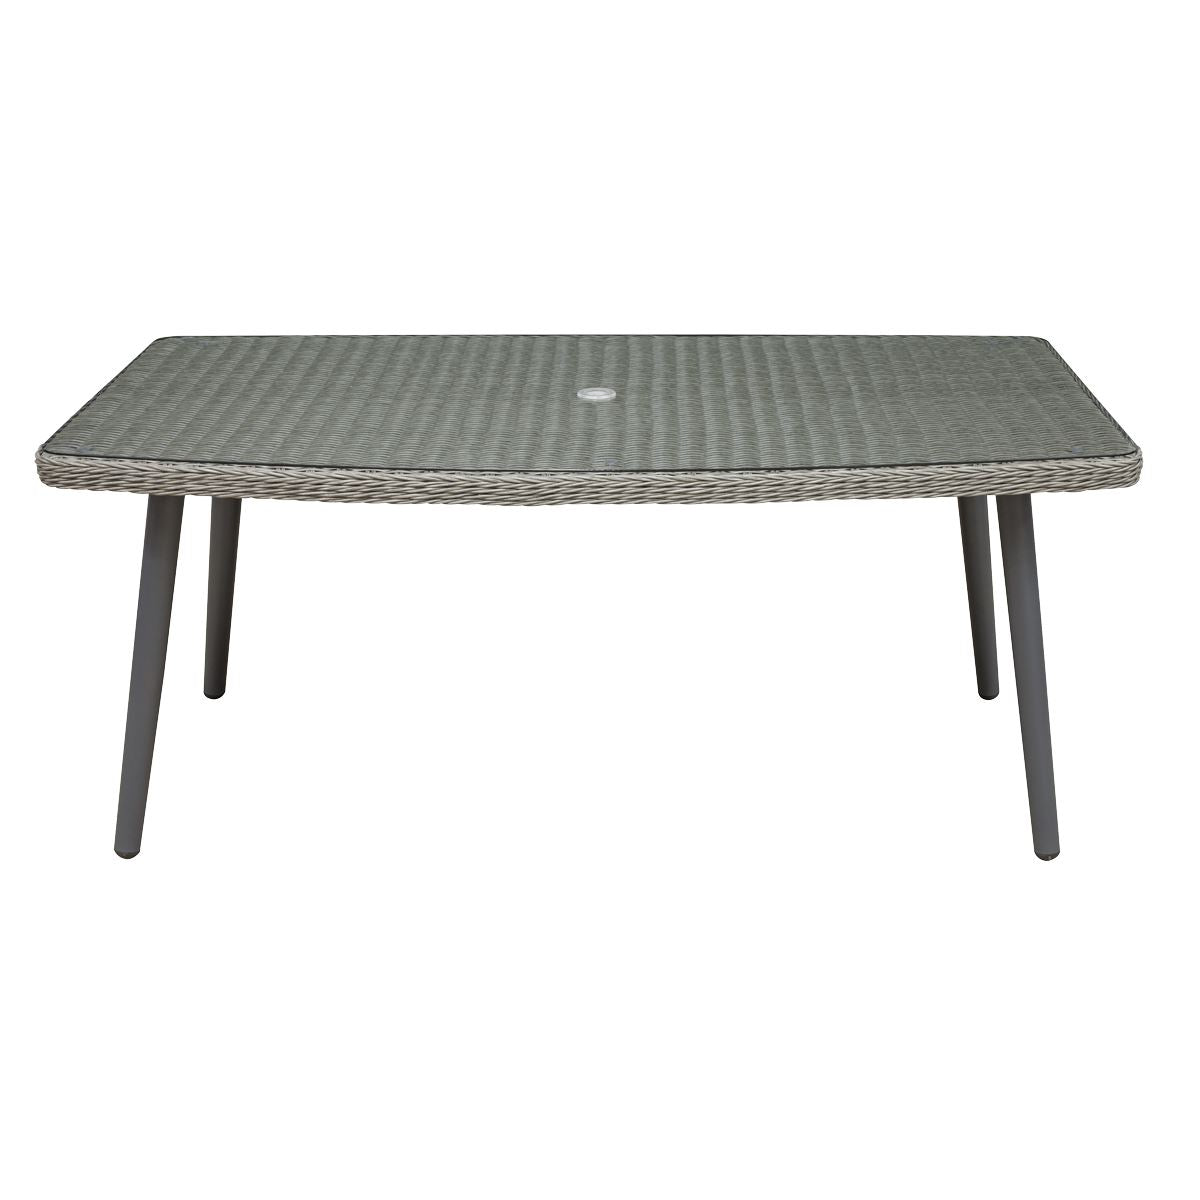 Dellonda Buxton Rattan Wicker Outdoor Dining Table with Clear Tempered Glass Top, Grey